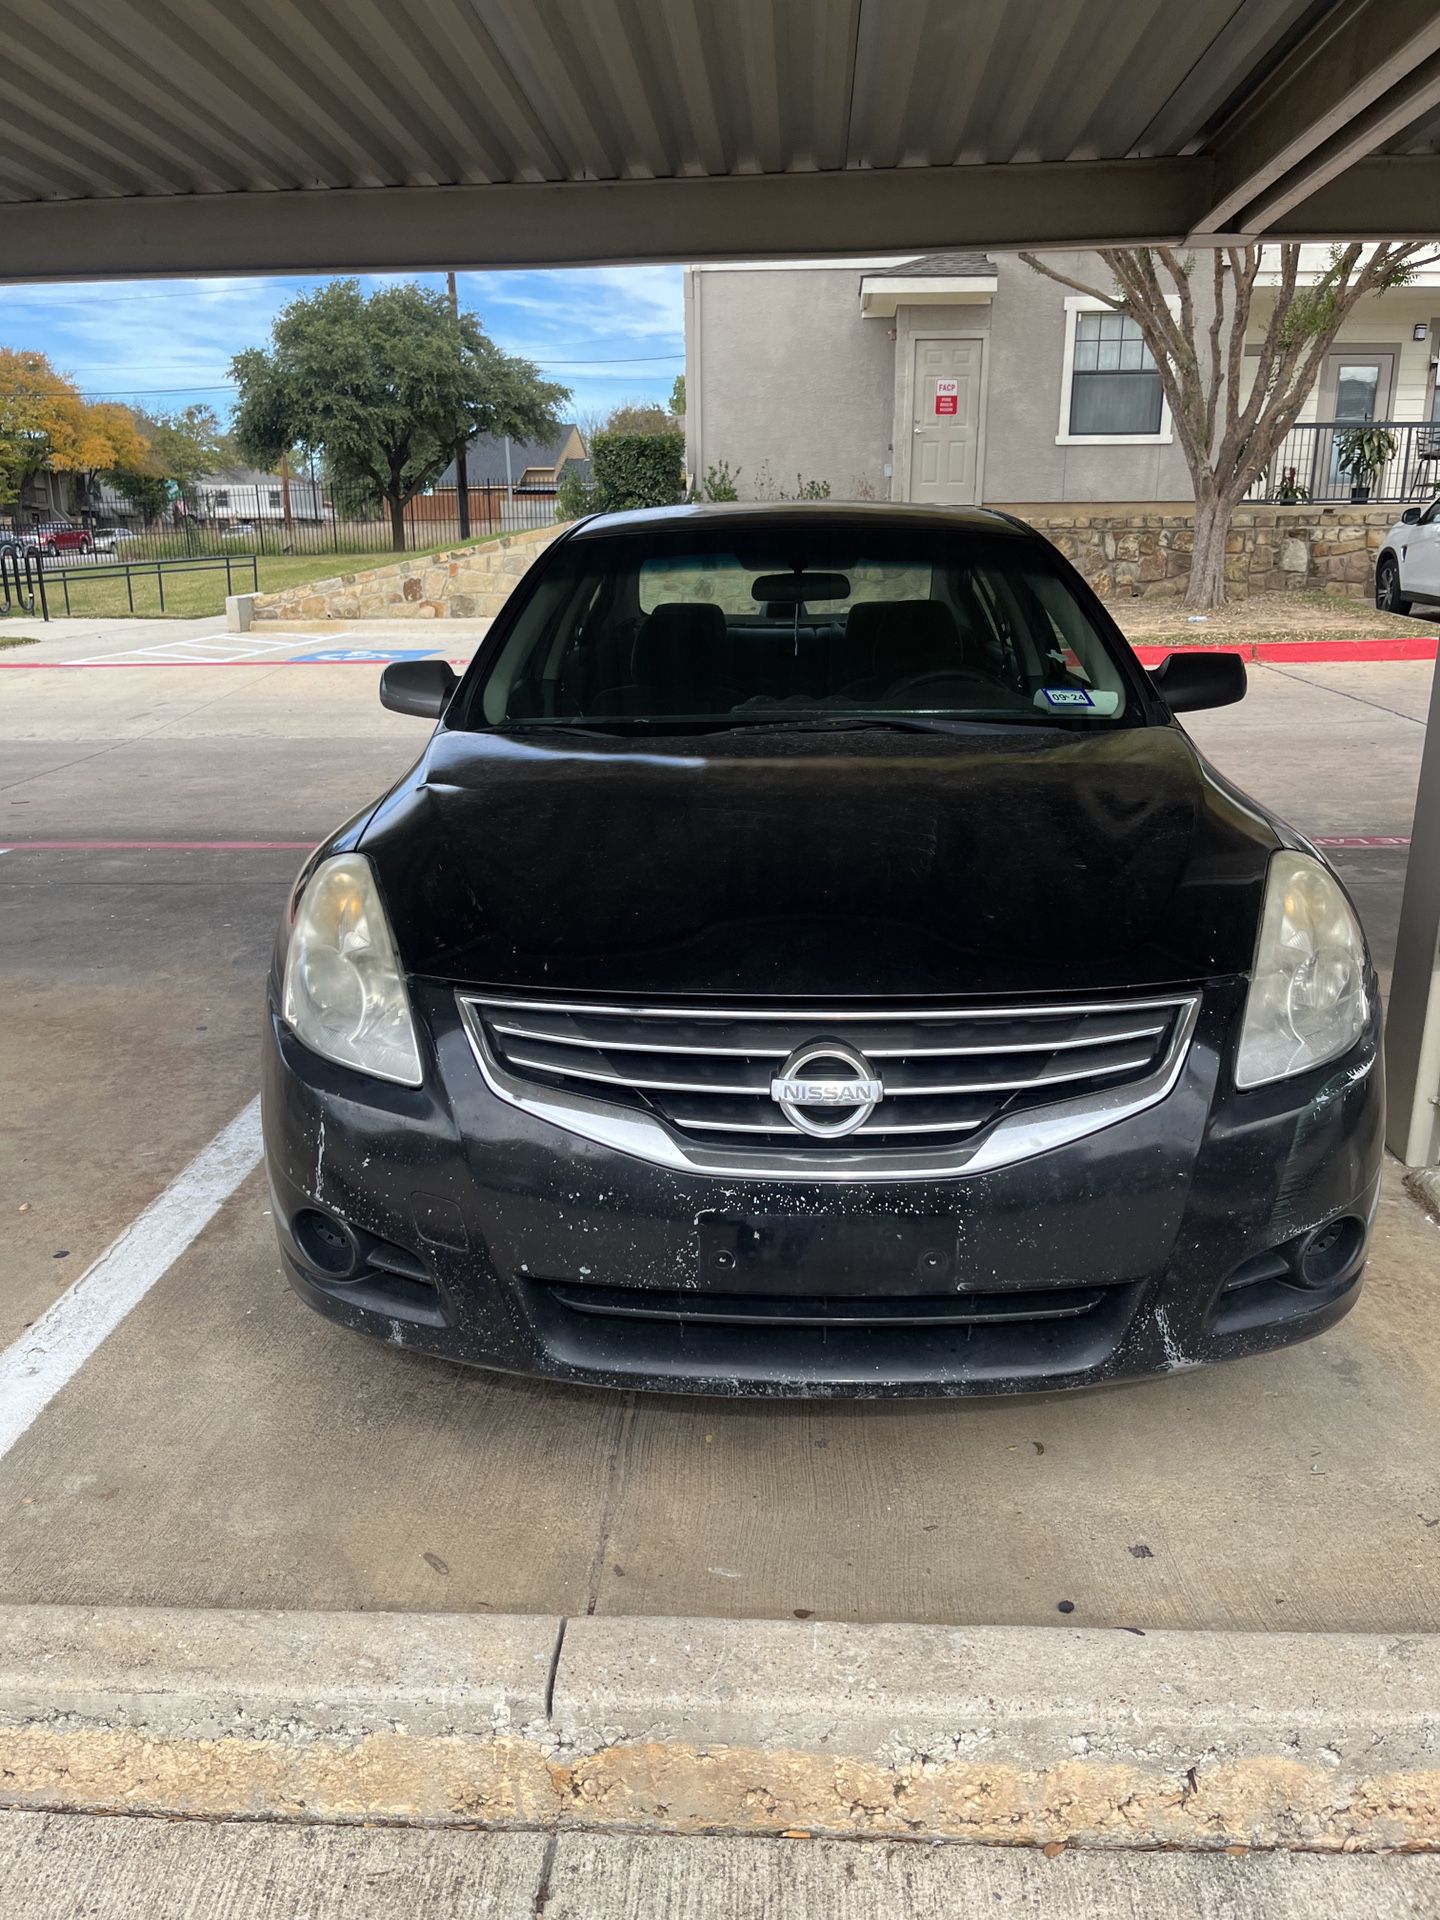 Nissan Altima For Sale!!! 